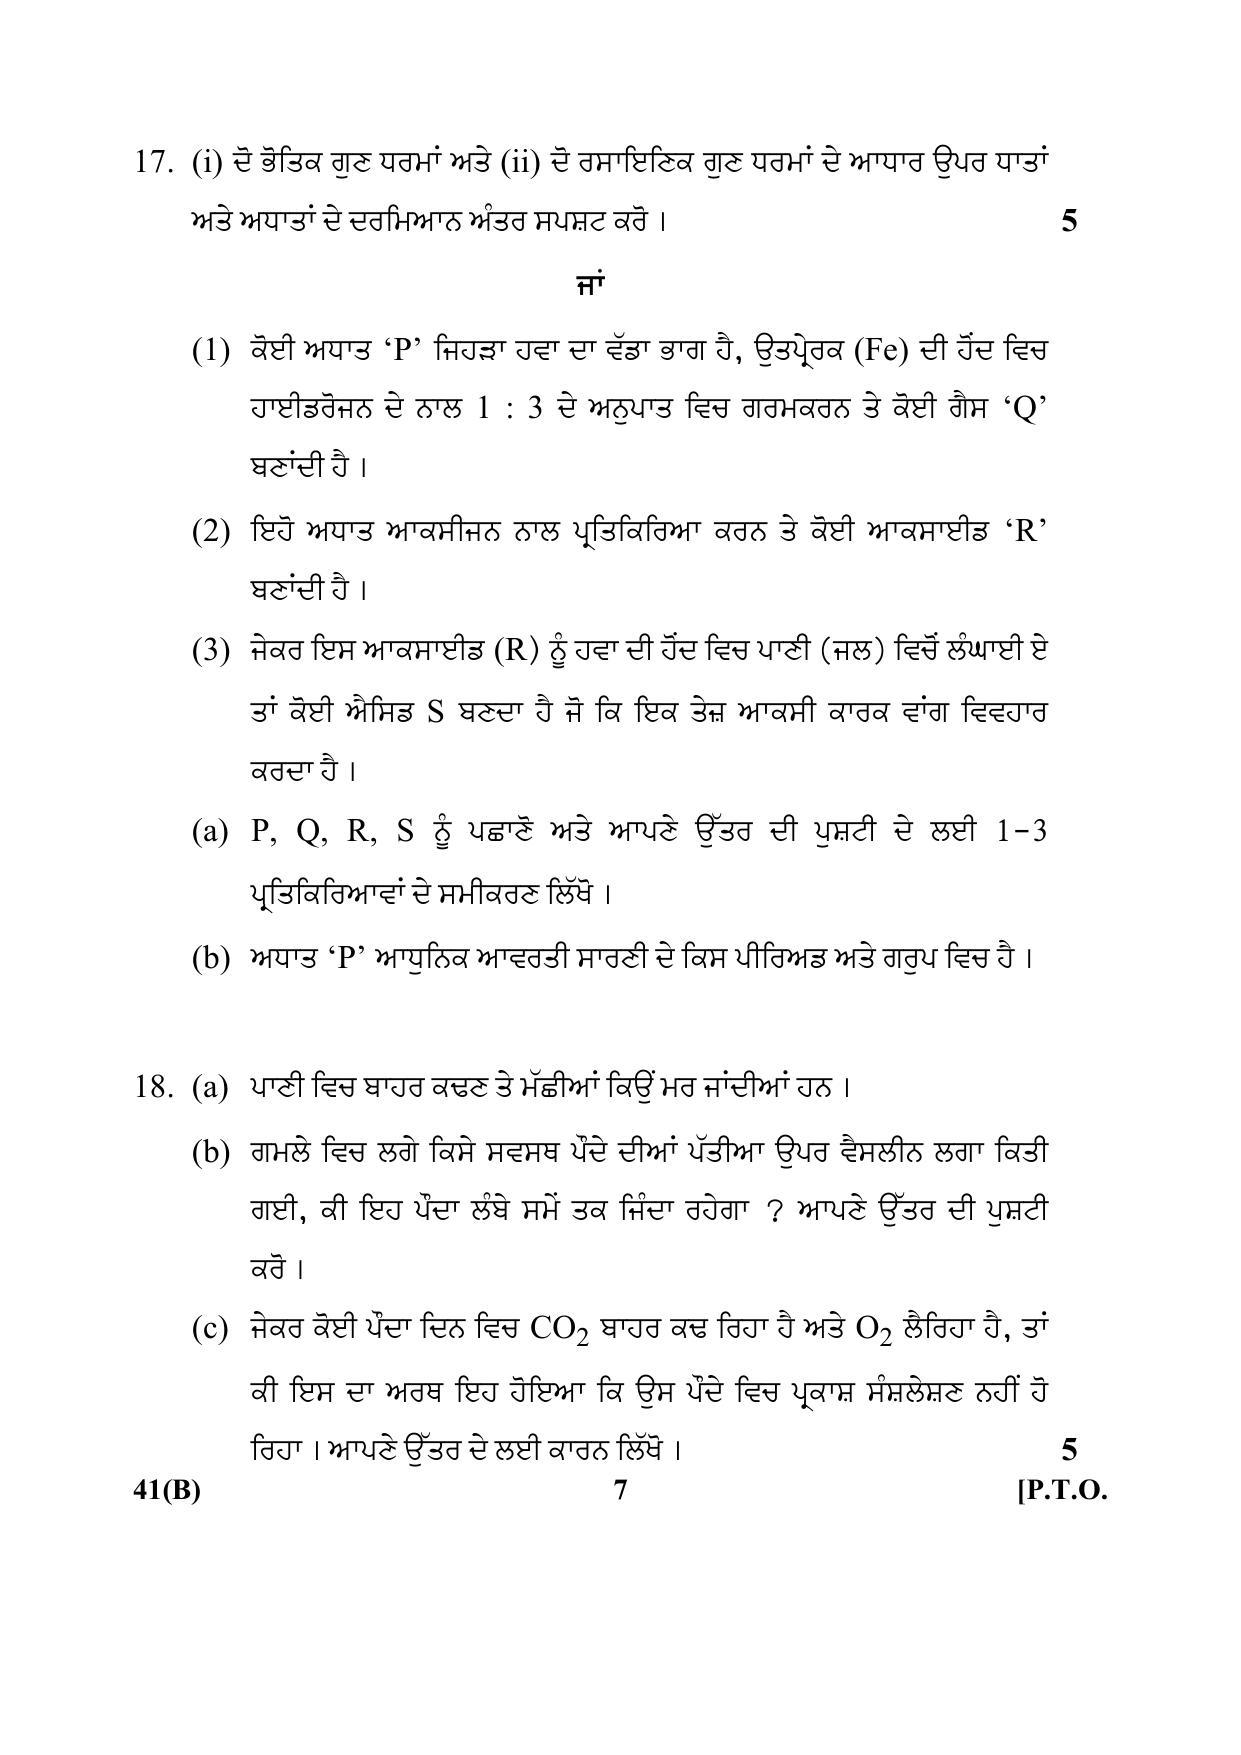 CBSE Class 10 41(B) (Science) For Blind_Punjabi 2018 Question Paper - Page 7